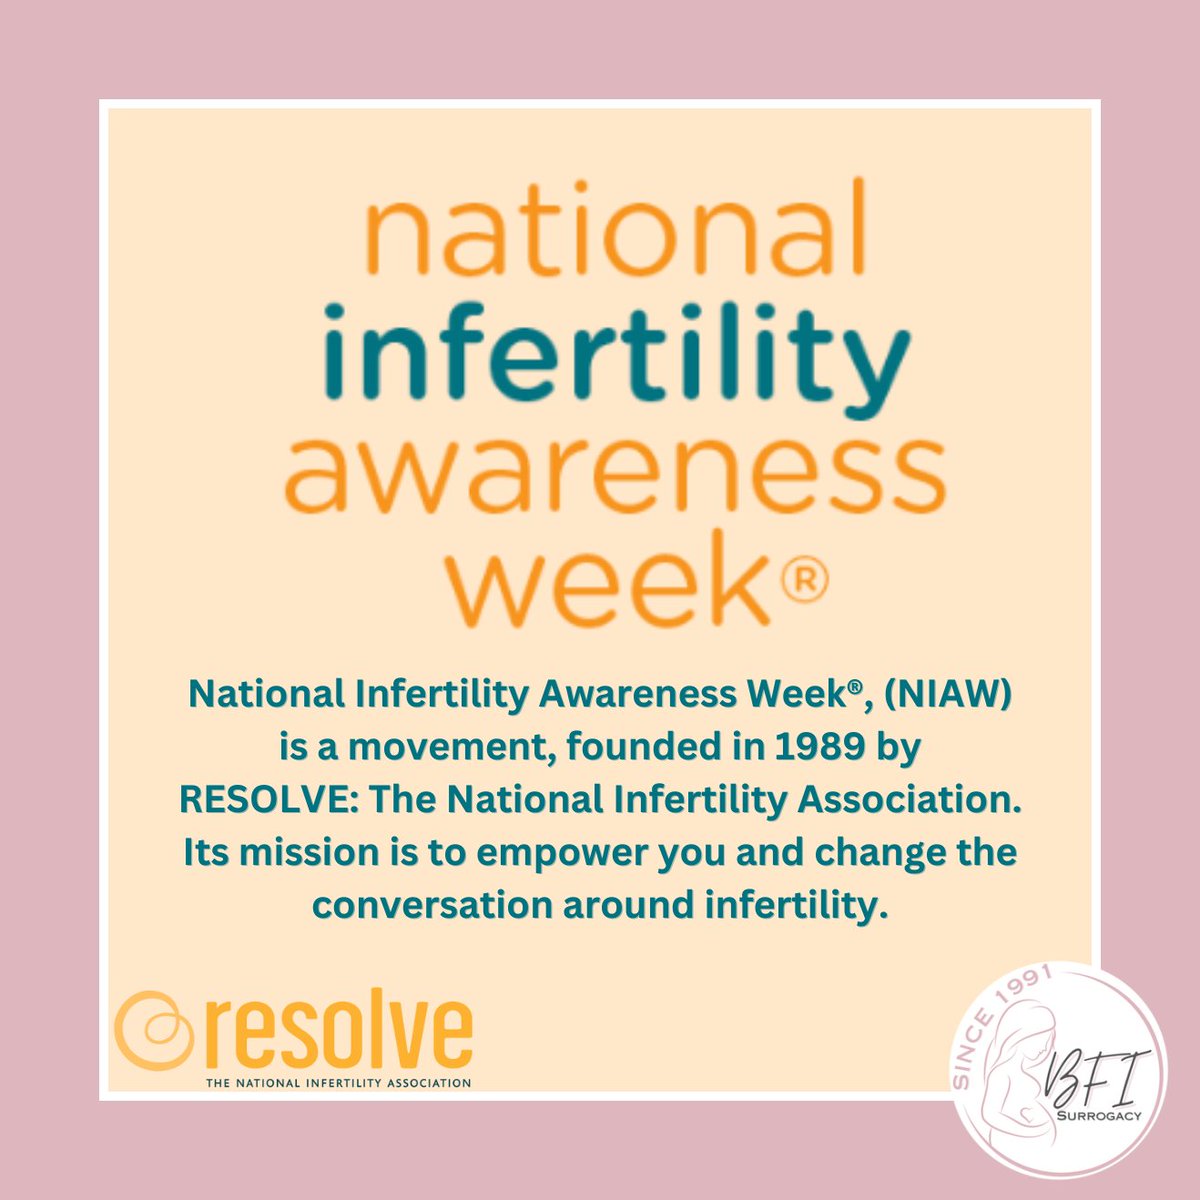 It's National Infertility Awareness Week! Visit Resolve.Org for more information on this incredible movement and the ways YOU can raise your voice!

#NIAW2024 #raiseyourvoice #resolve #infertilityawareness #bfisurrogacy #buildingfamiliesinc